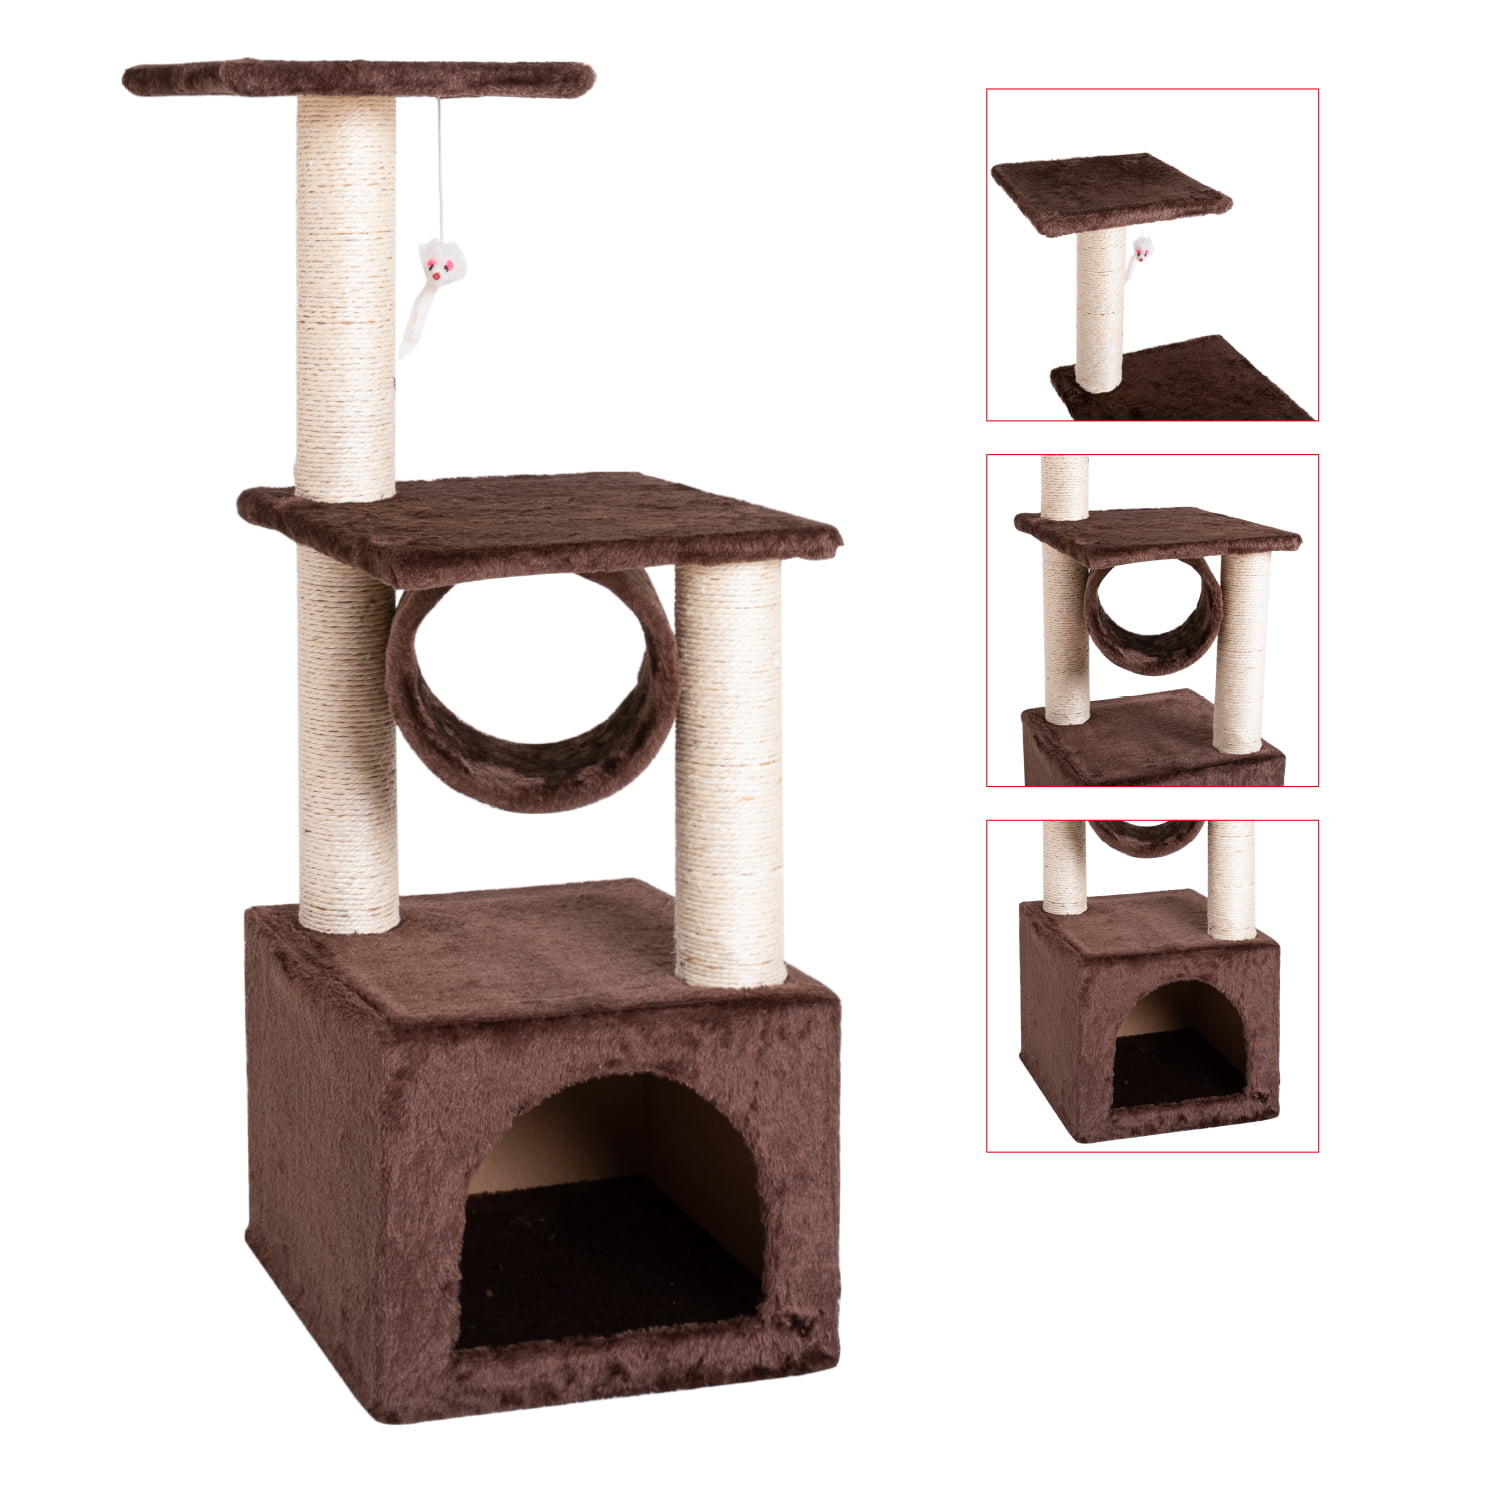 36" 52" 60" 80" Cat Tree Tower Condo Furniture Scratch Post Kitty Pet House Play 